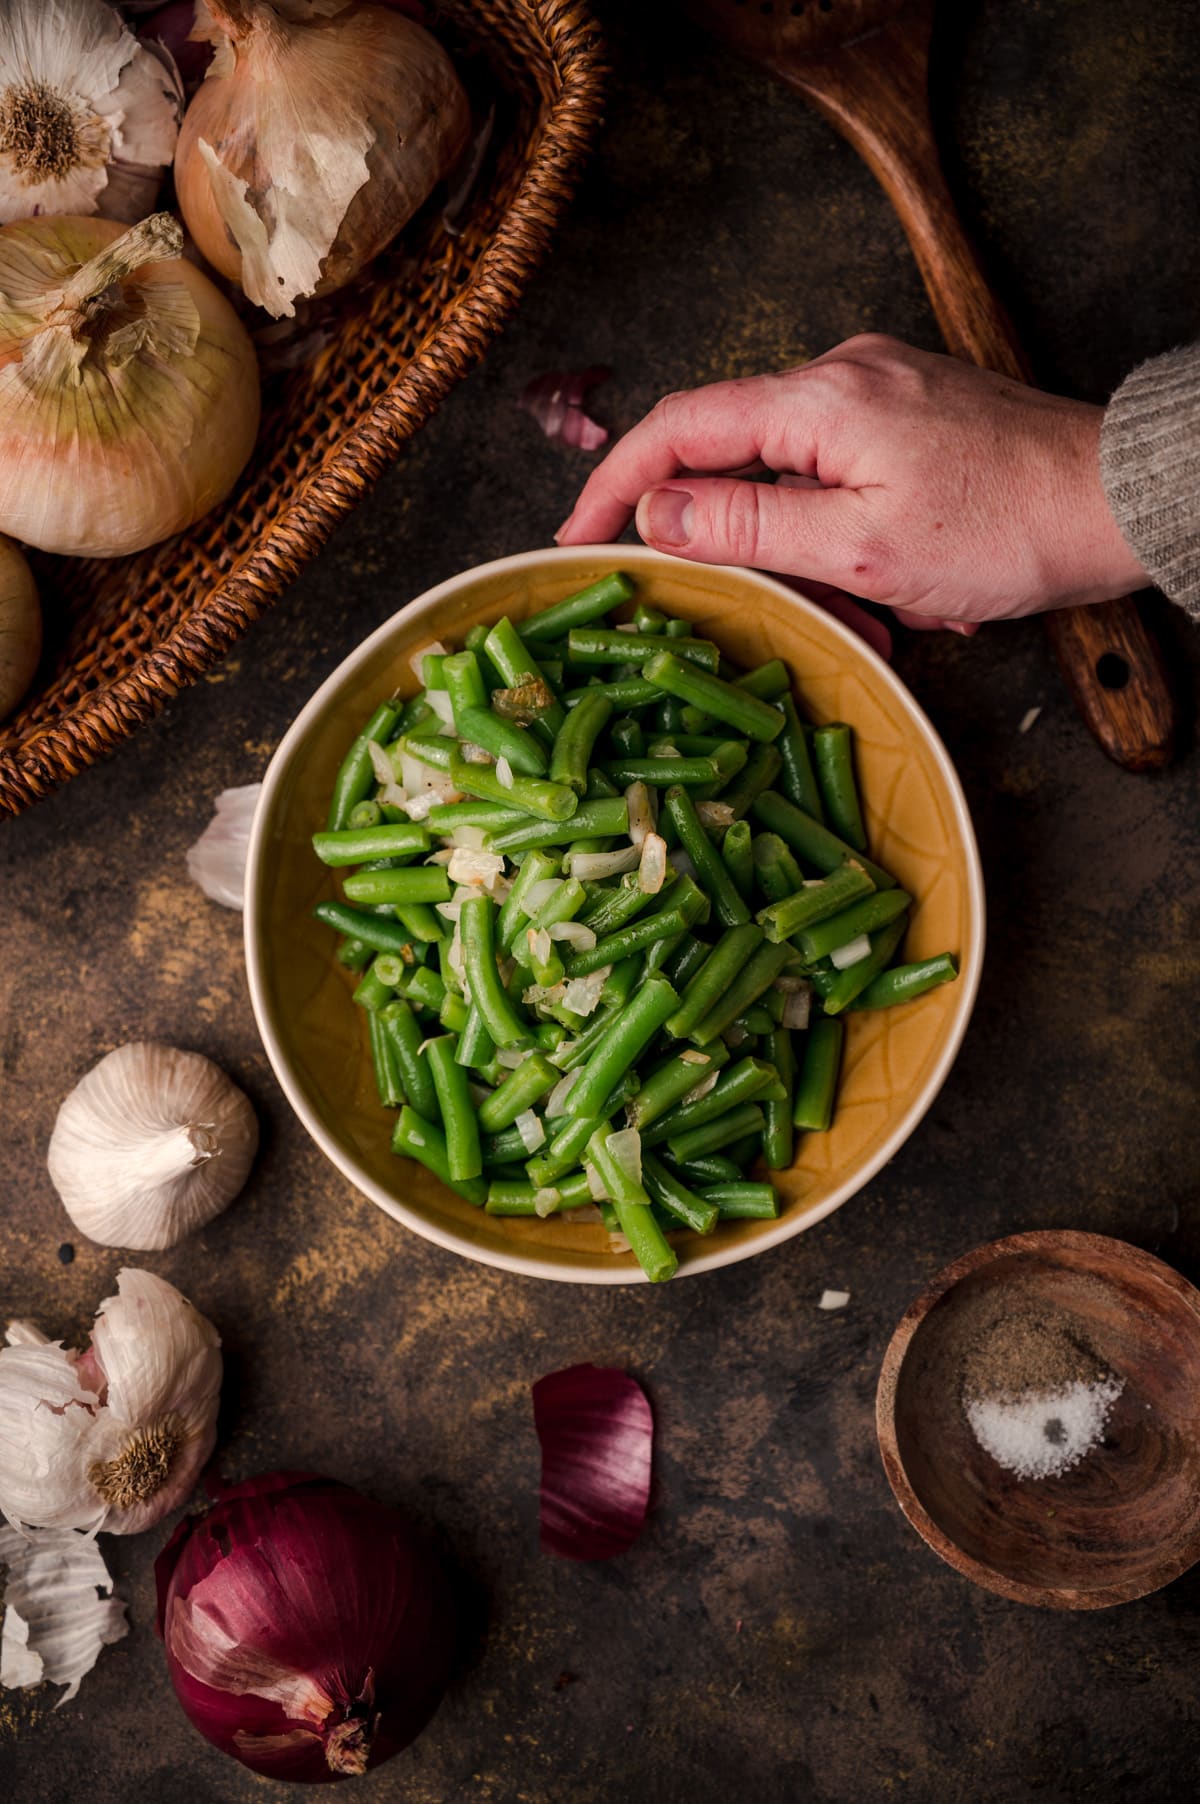 Woman reaching for a golden yellow bowl of cooked canned green beans.